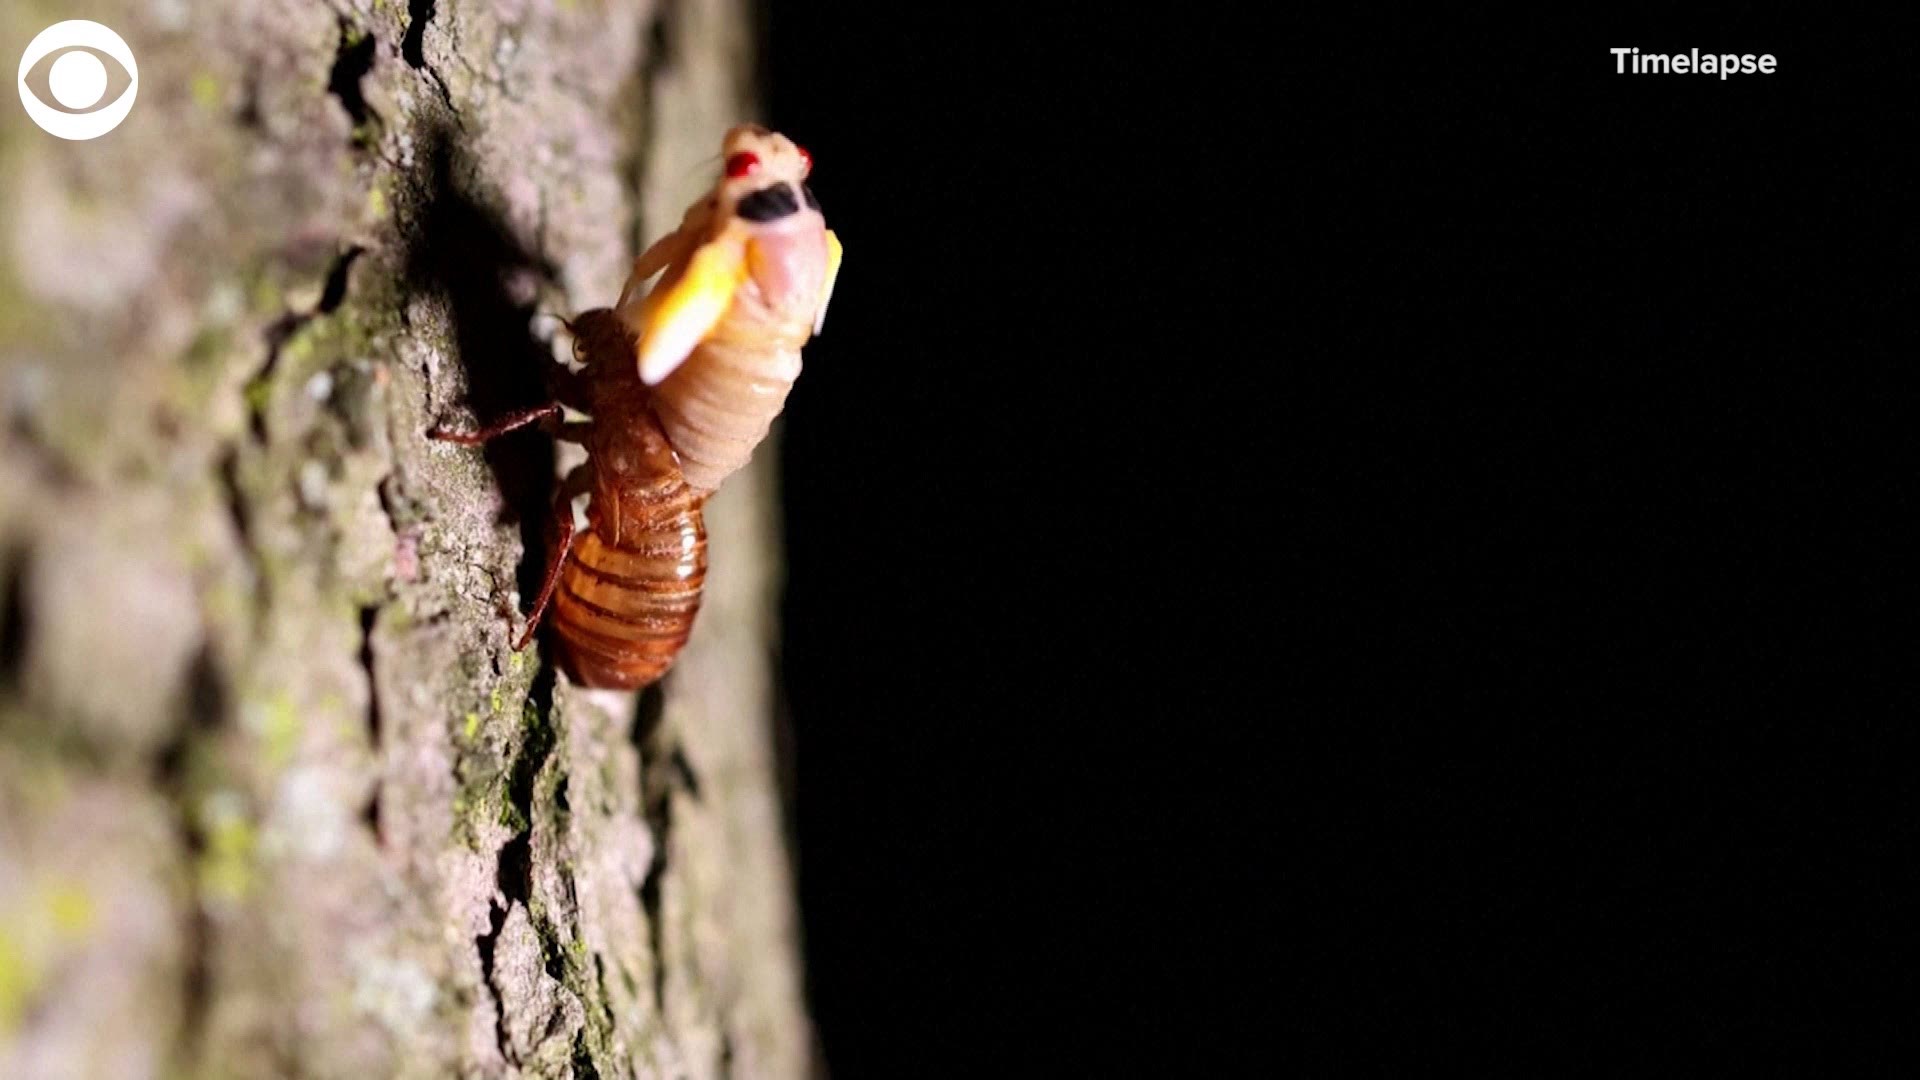 Watch this timelapse video of a cicada shedding its exoskeleton. Billions of cicadas are expected to emerge in parts of the U.S. after 17 years underground.